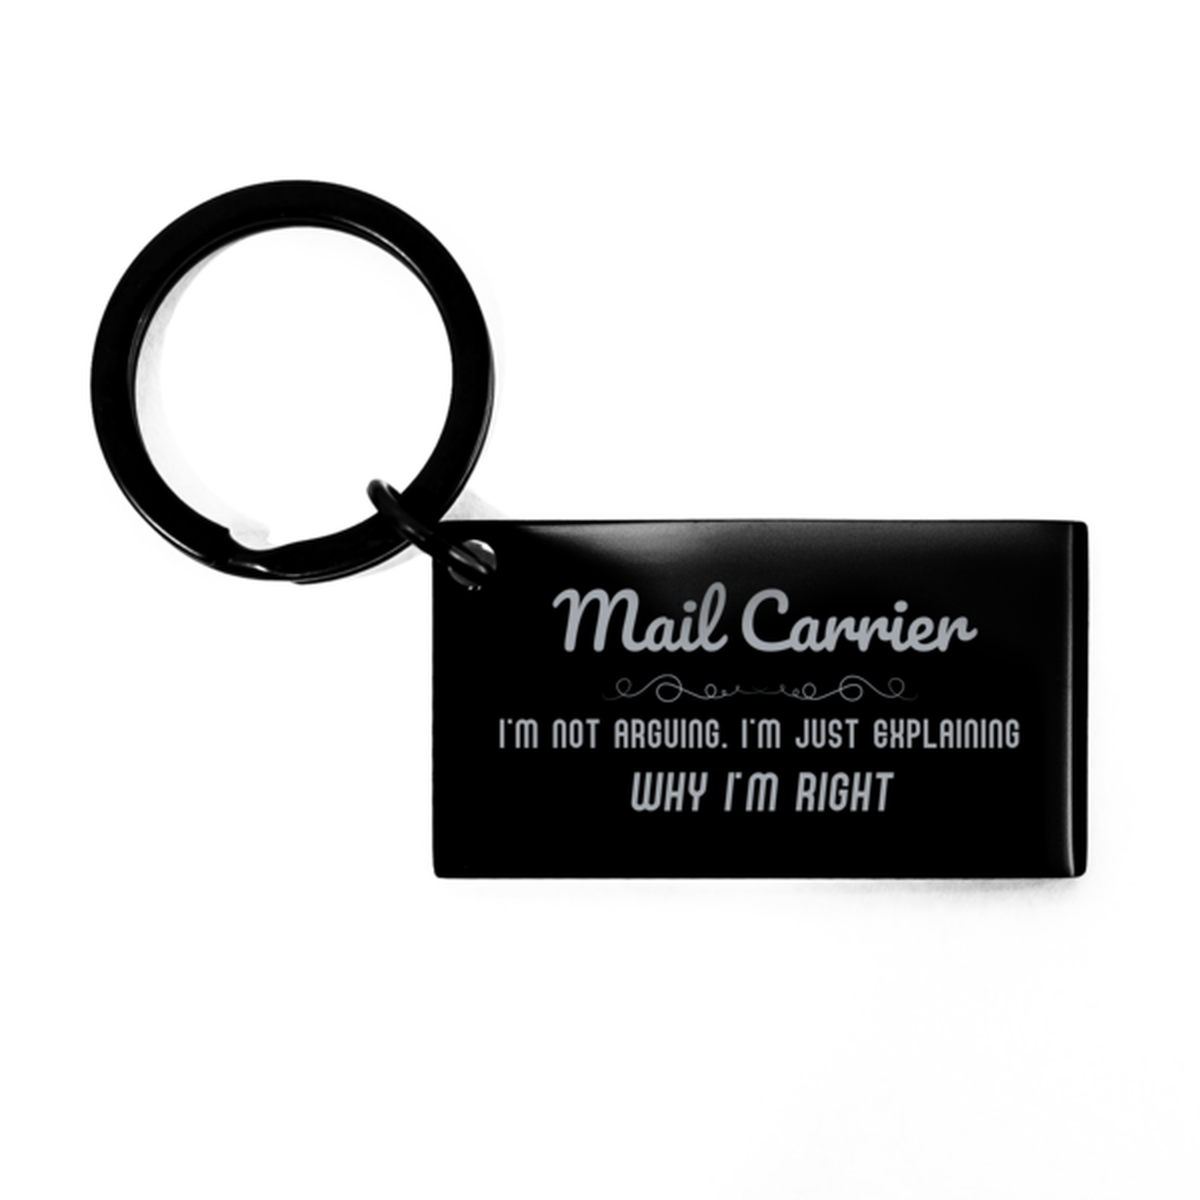 Mail Carrier I'm not Arguing. I'm Just Explaining Why I'm RIGHT Keychain, Funny Saying Quote Mail Carrier Gifts For Mail Carrier Graduation Birthday Christmas Gifts for Men Women Coworker